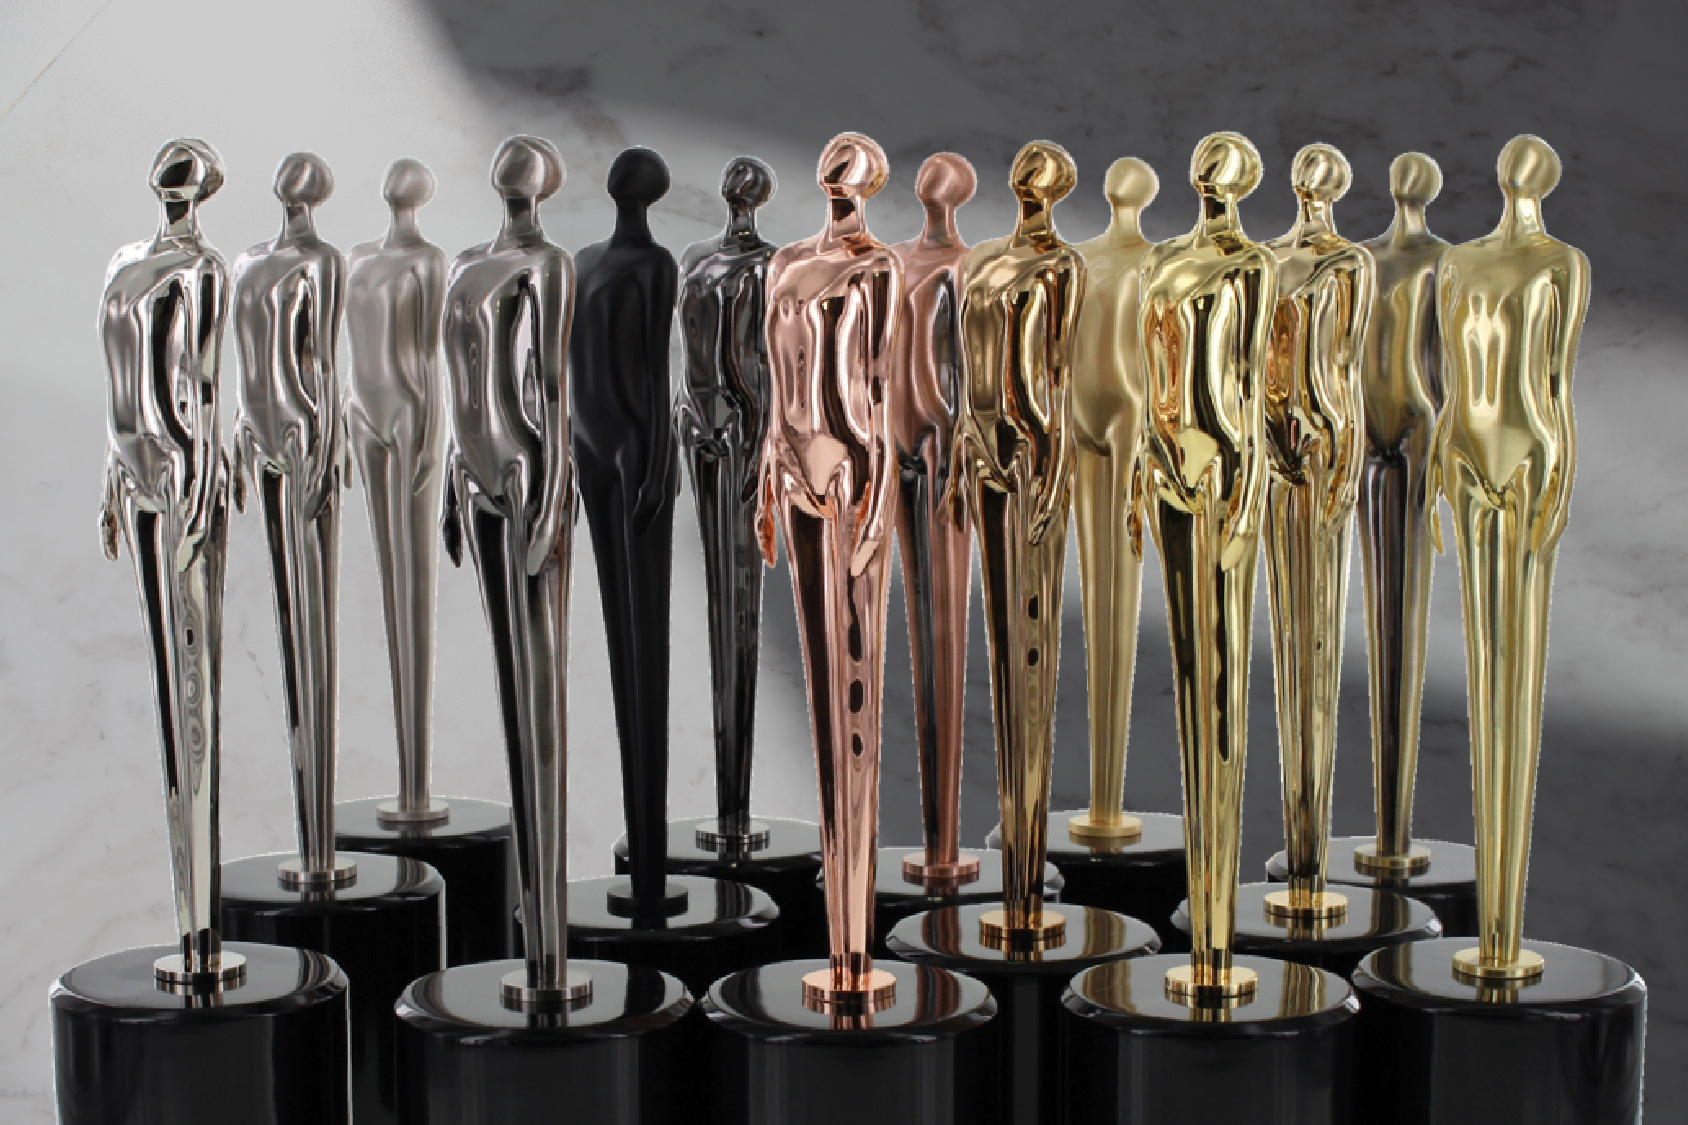 A collection of the Proud Form trophy in all different custom electroplated finishes